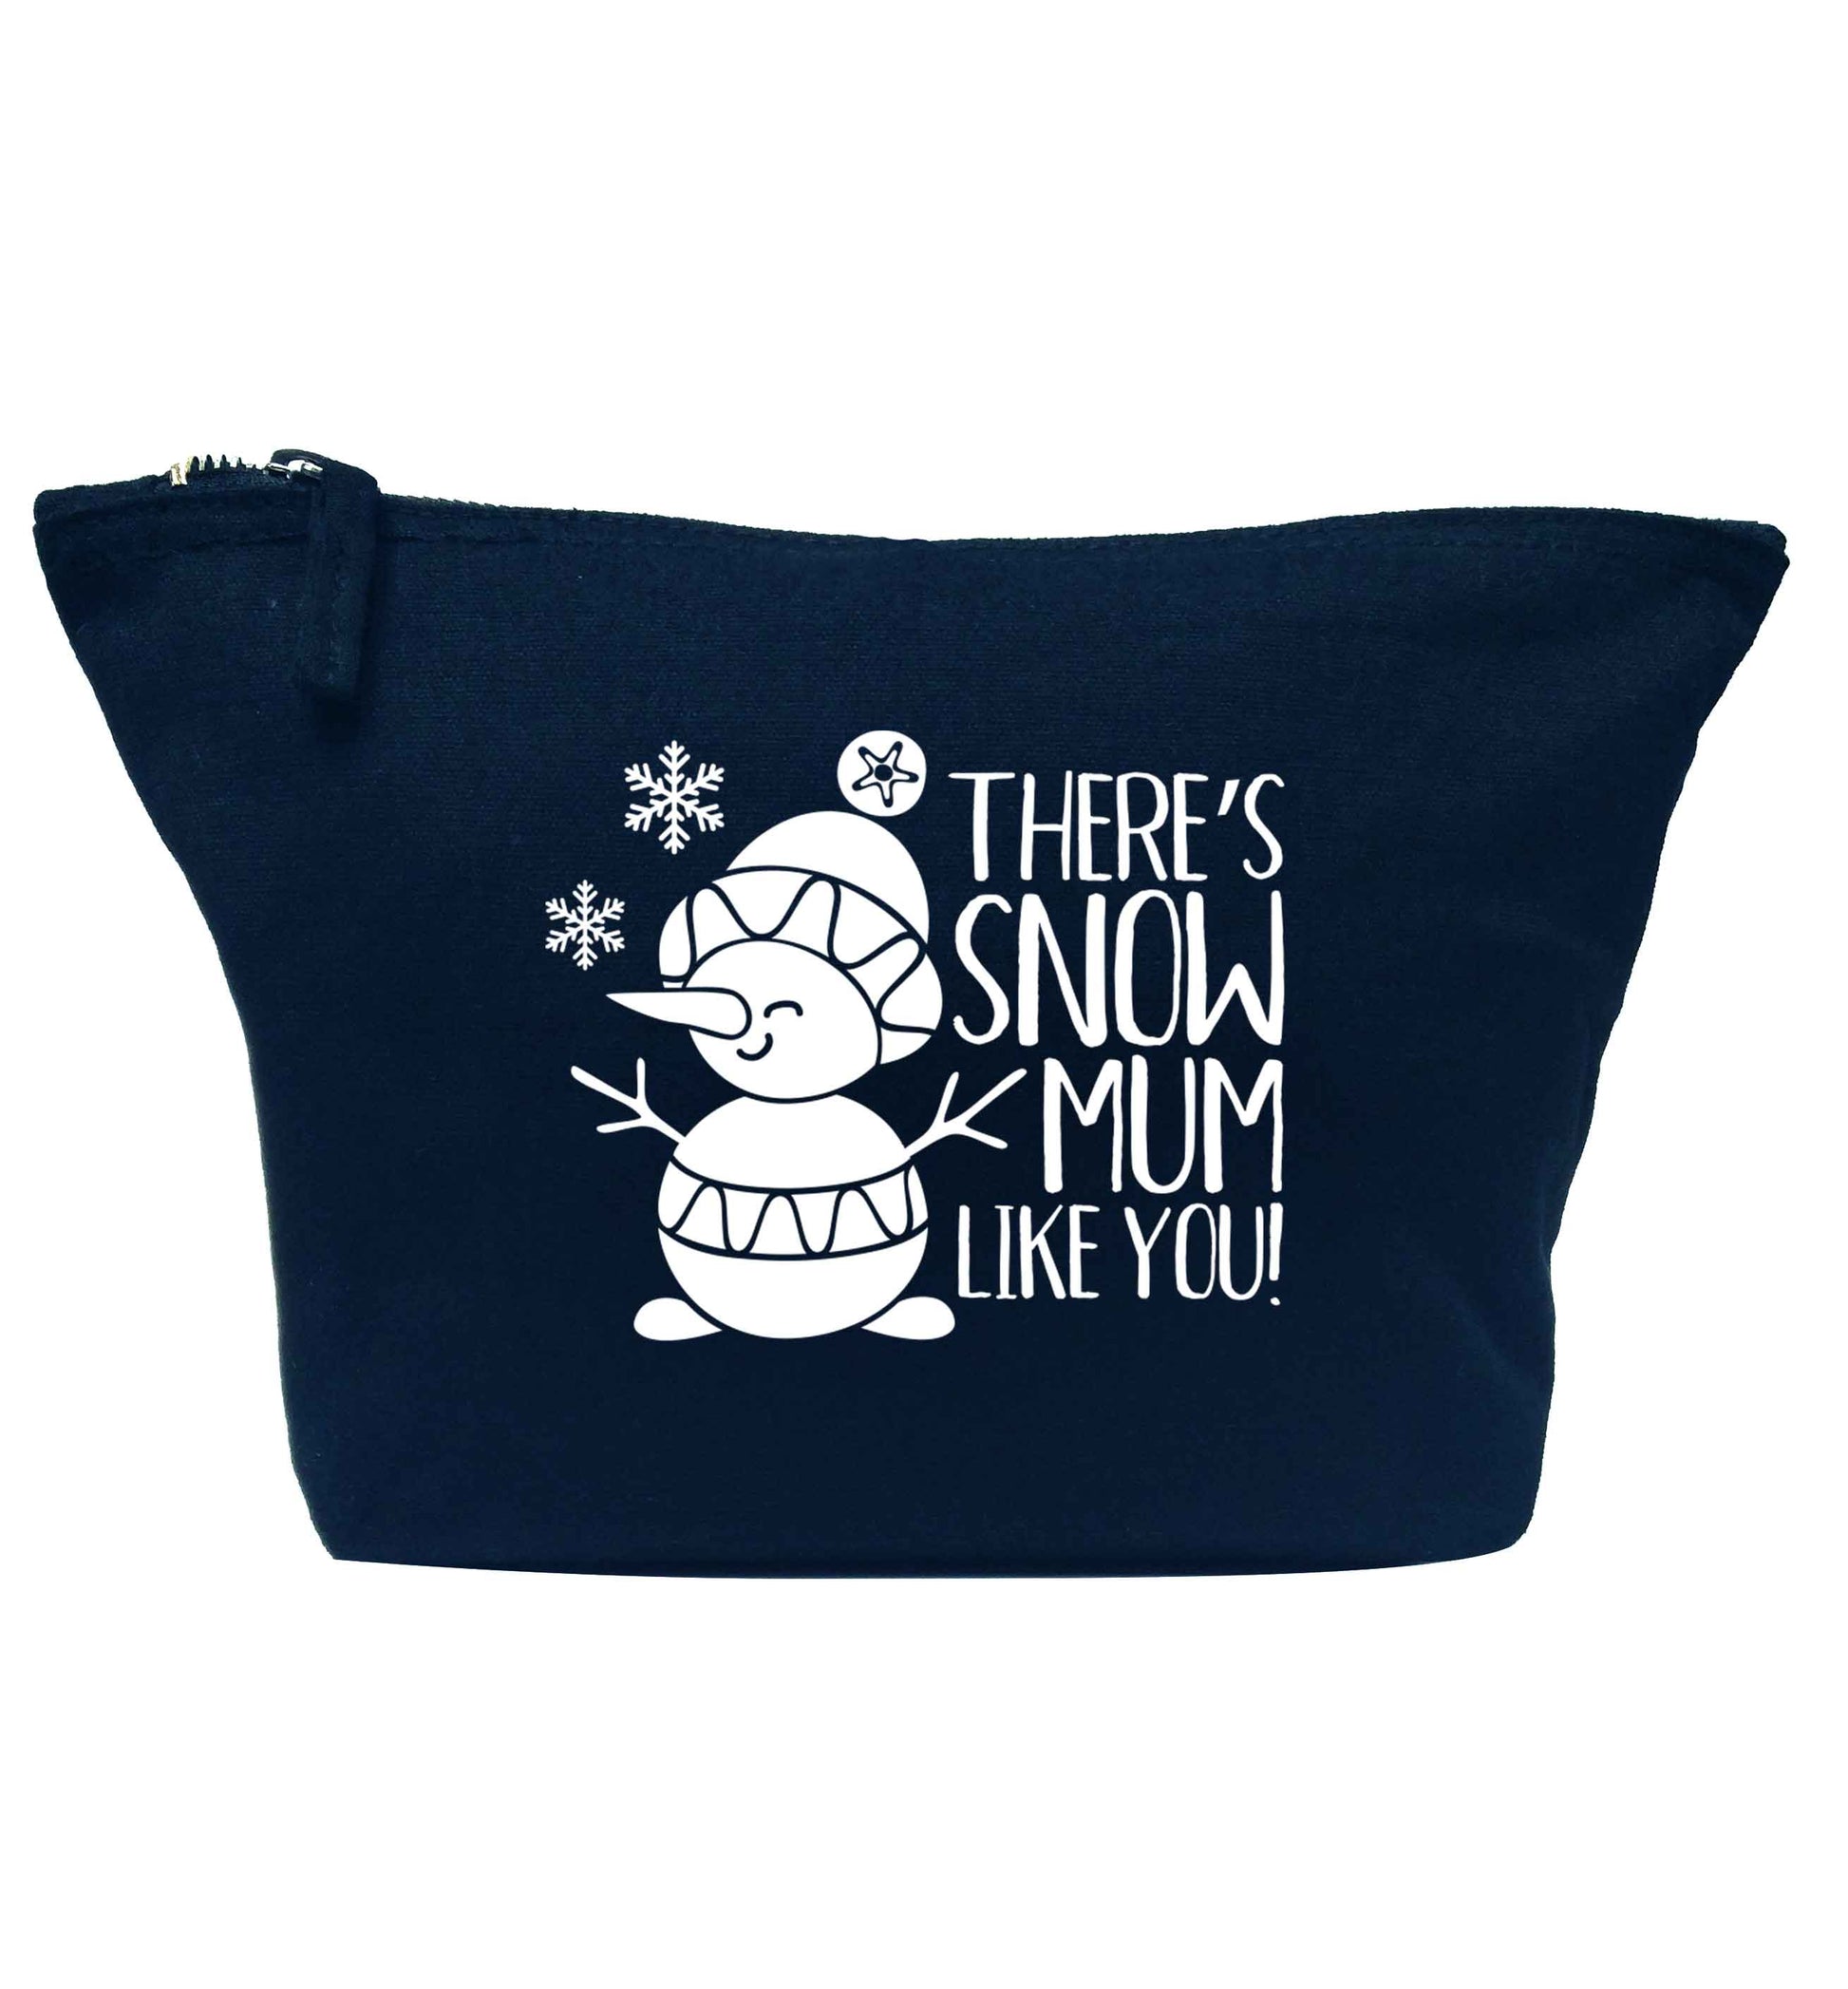 There's snow mum like you navy makeup bag